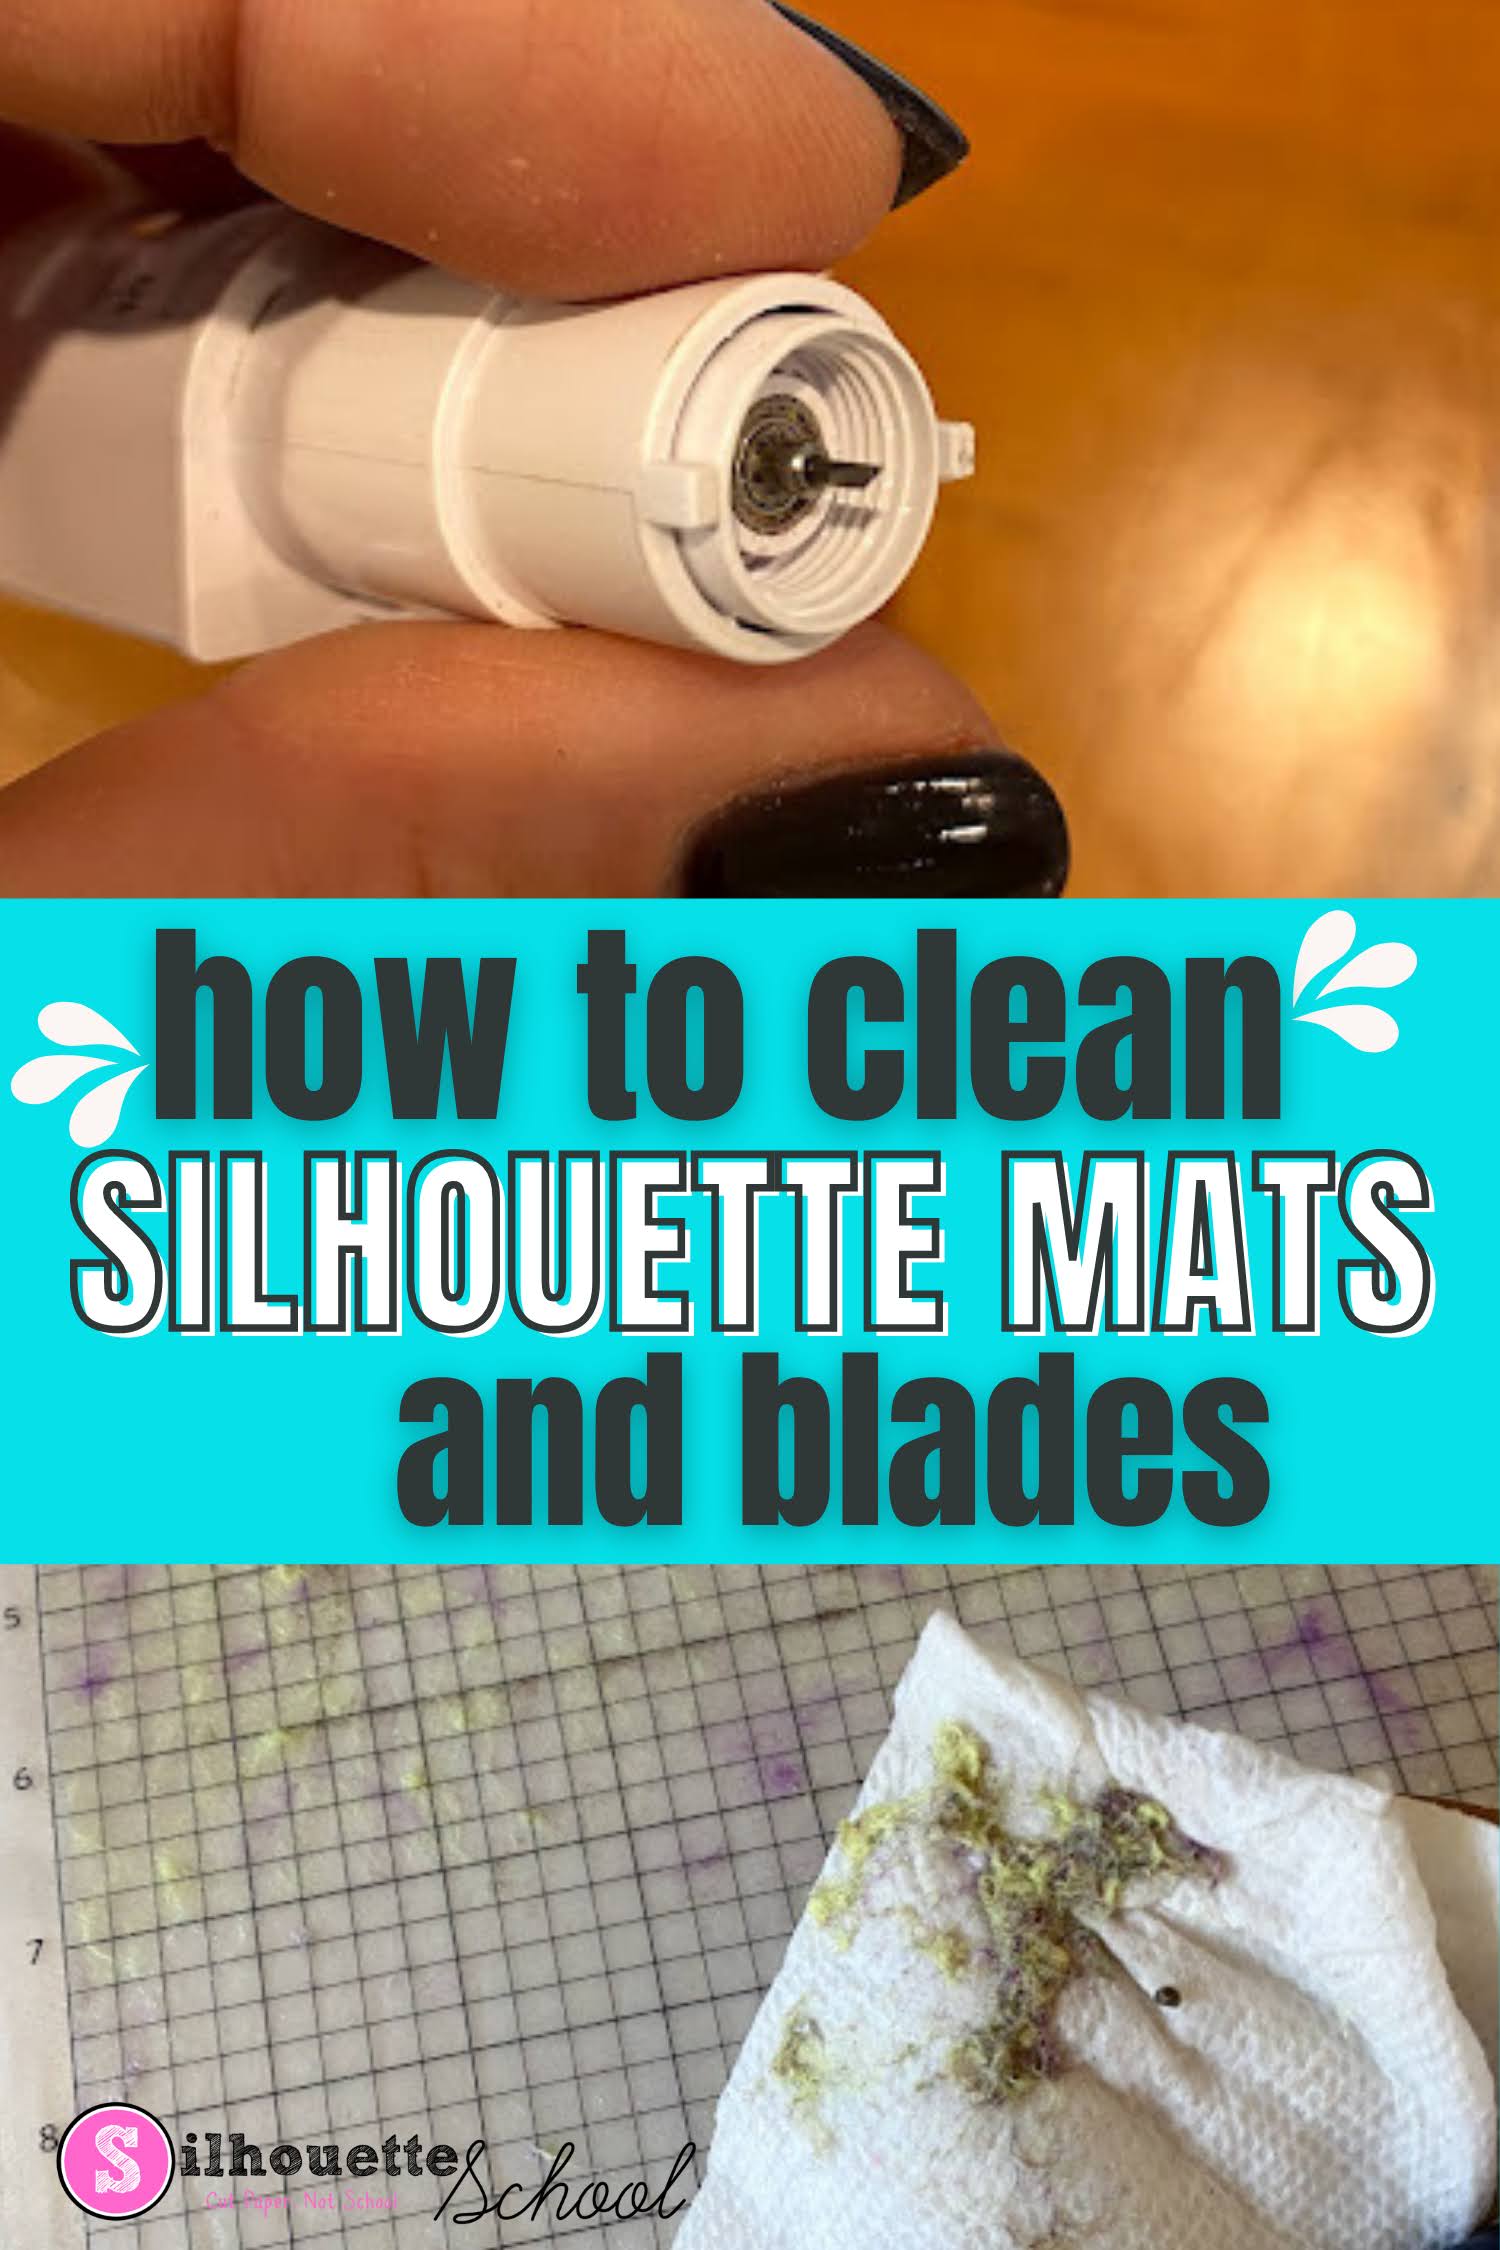 How to Cut Longer Than the Silhouette Cutting Mat (V4 Tutorial) -  Silhouette School